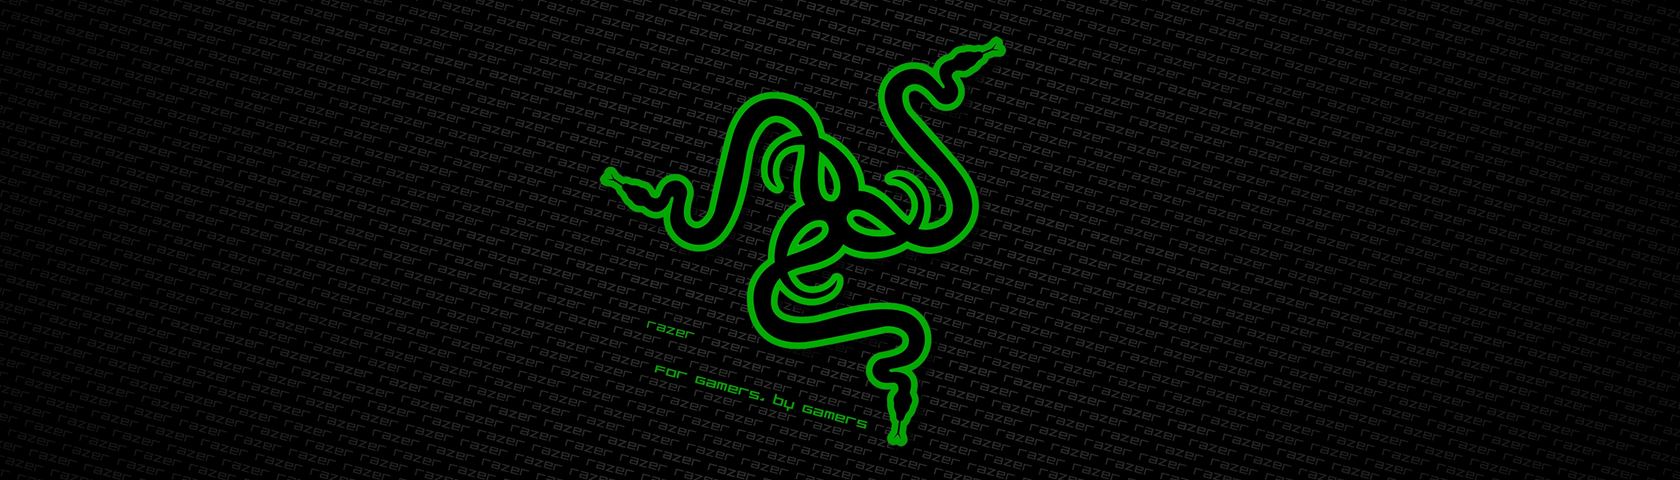 Razer Wallpaper Images Wallpaperfusion By Binary Fortress Software